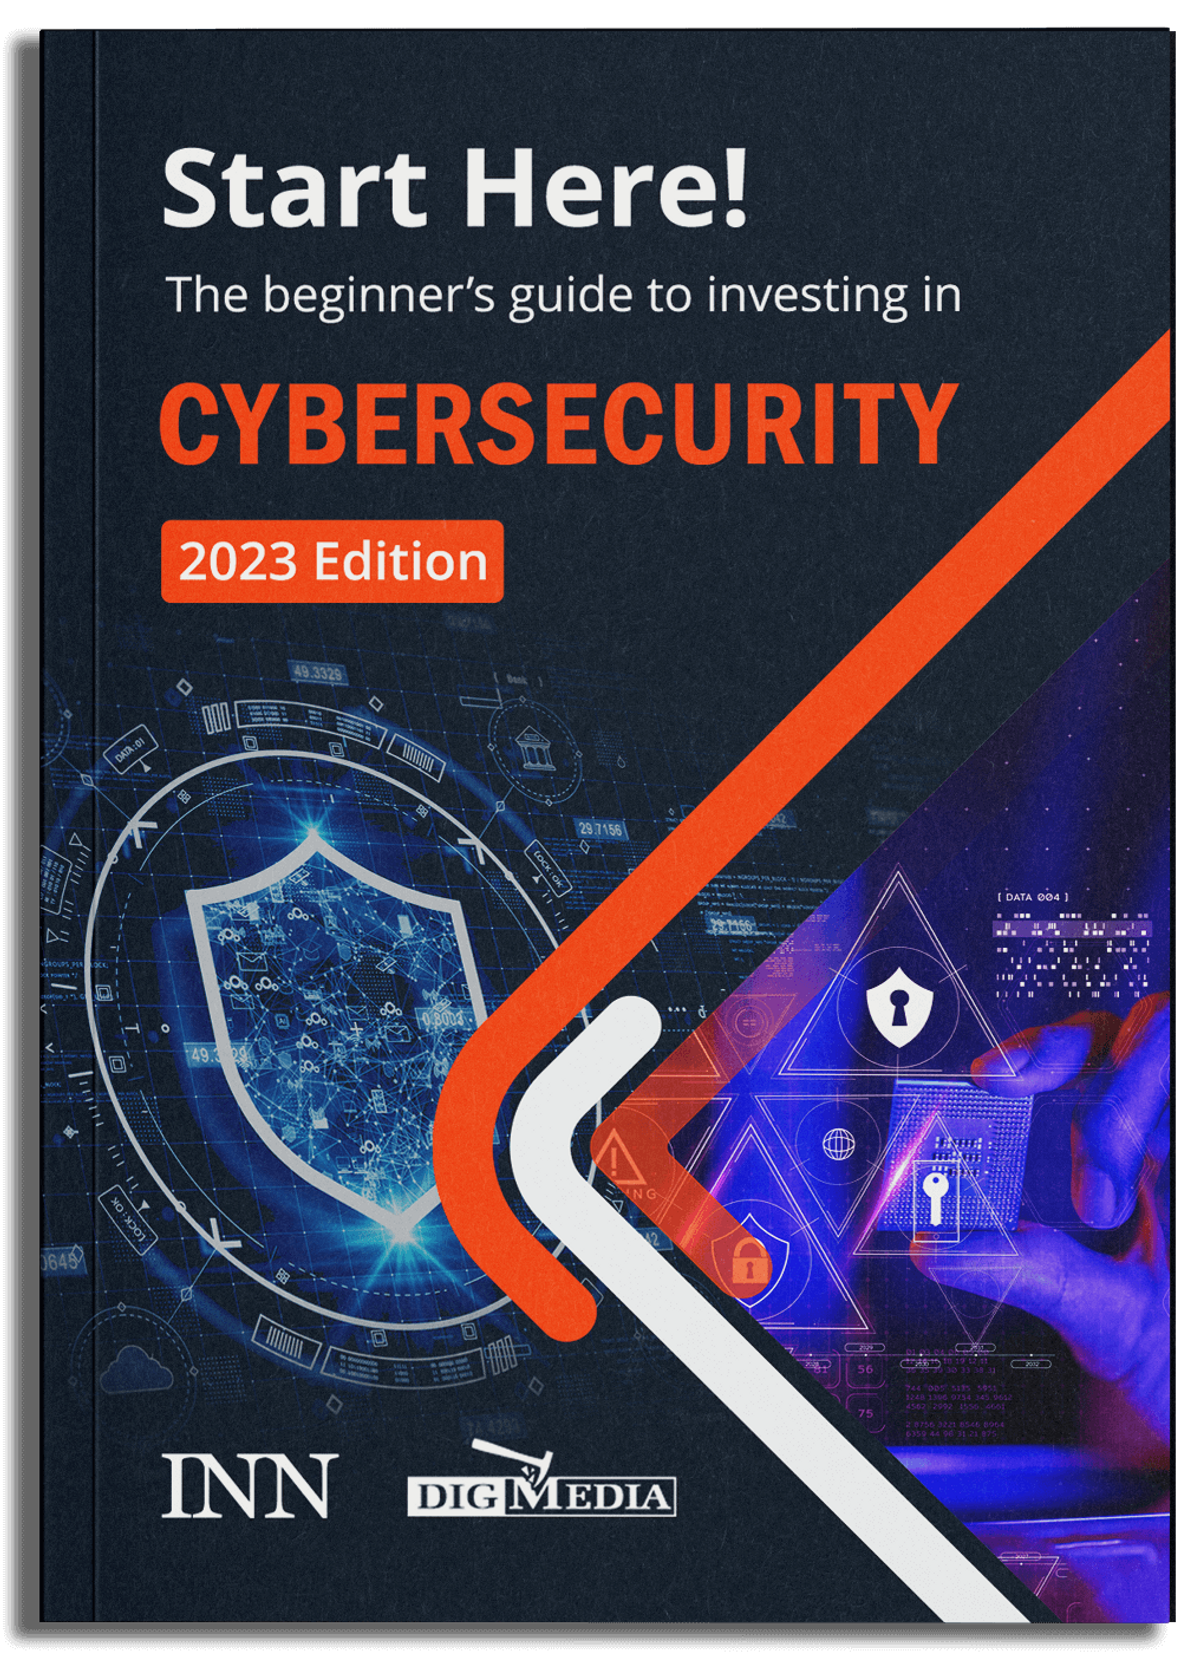 The Beginner's Guide to Investing in Cybersecurity